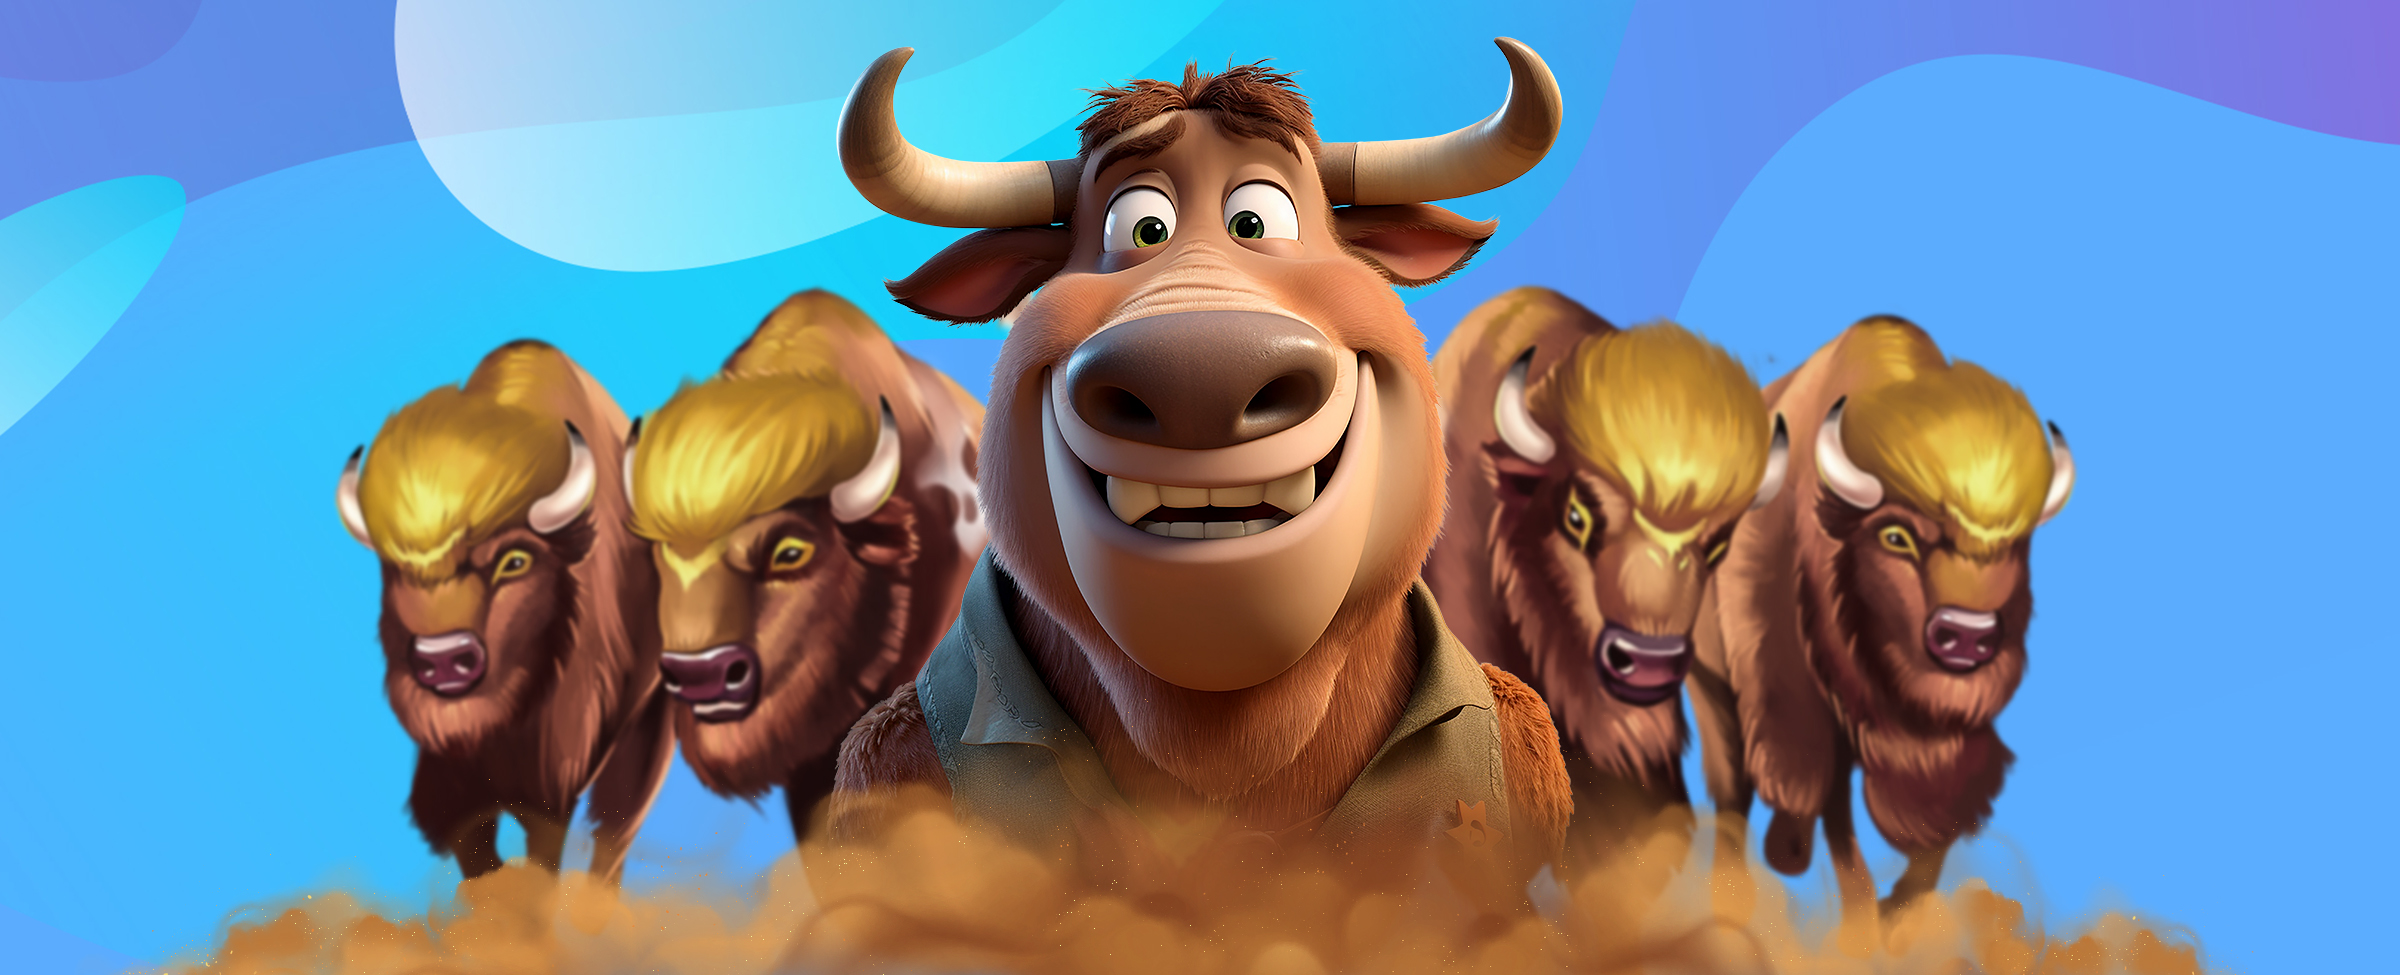 Pictured are four 3D-animated buffalo characters from the SlotsLV slots game, Golden Buffalo, rushing towards the screen, flanking a cartoon buffalo in the middle of the image. Beneath the buffalos is dust, while behind, we see a multi-toned blue abstract background.